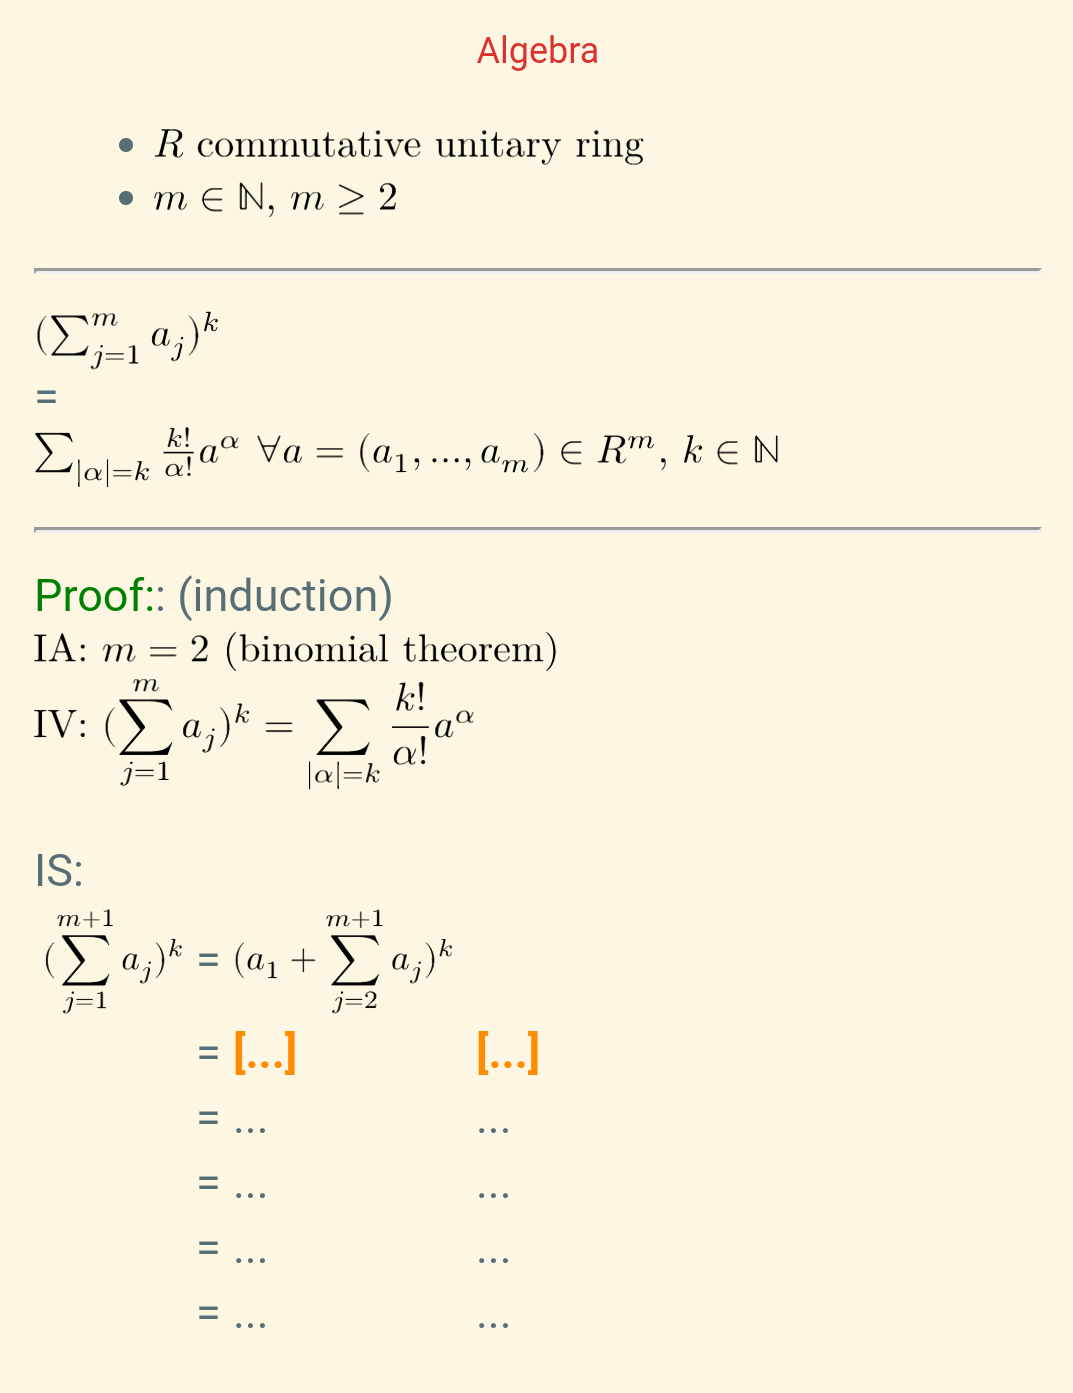 Maphy-Proofs-OC example front side cloze 2